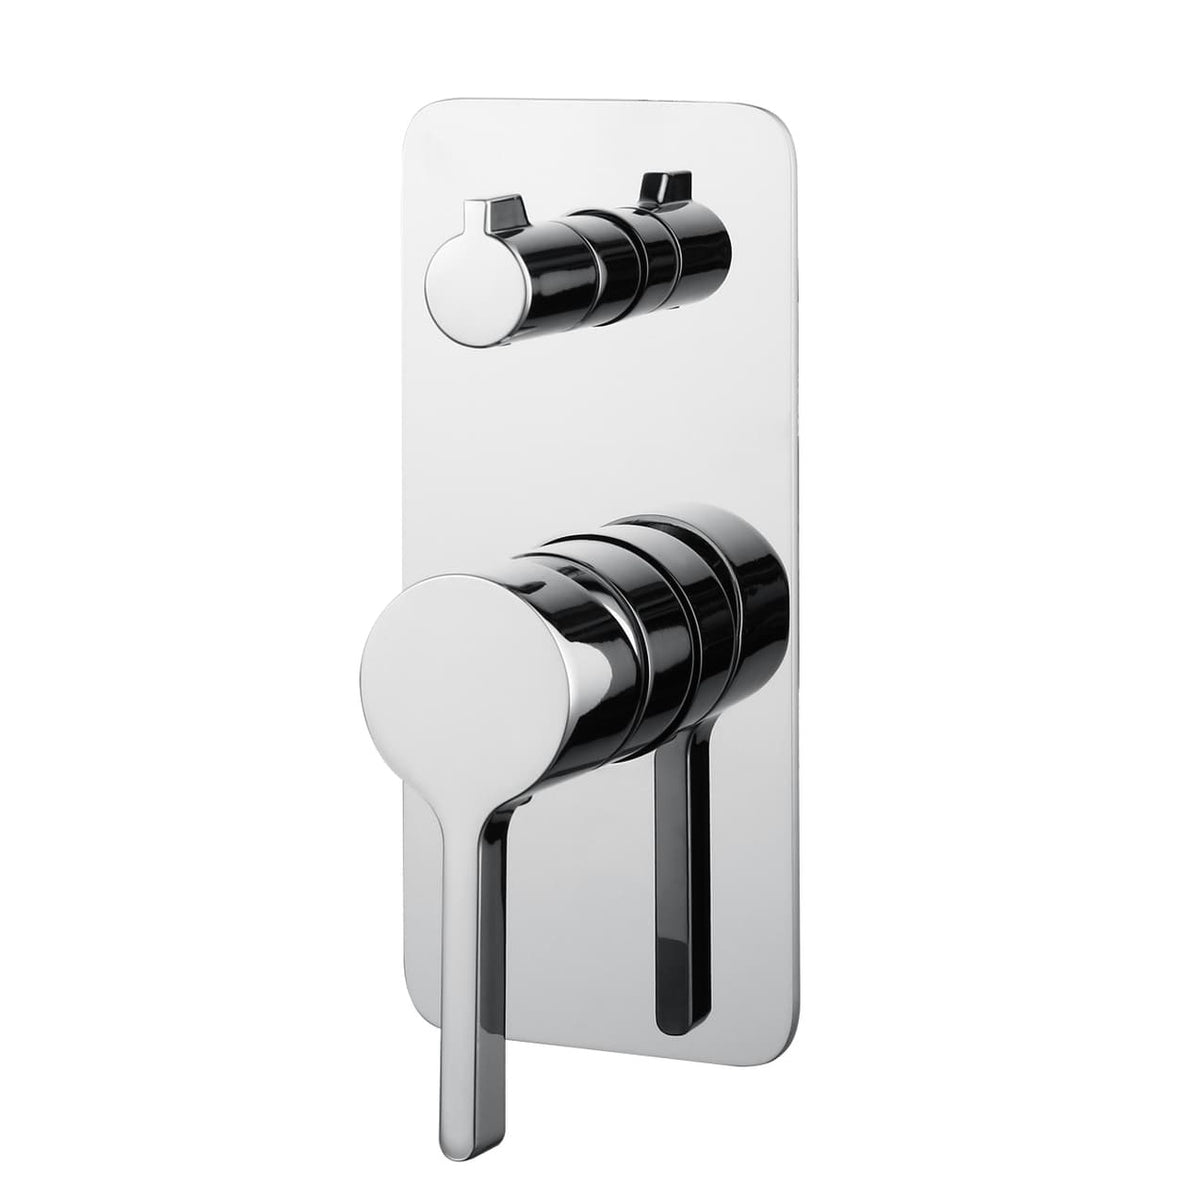 Kenzo Shower and Bath mixer with Diverter Polished Chrome WT6509